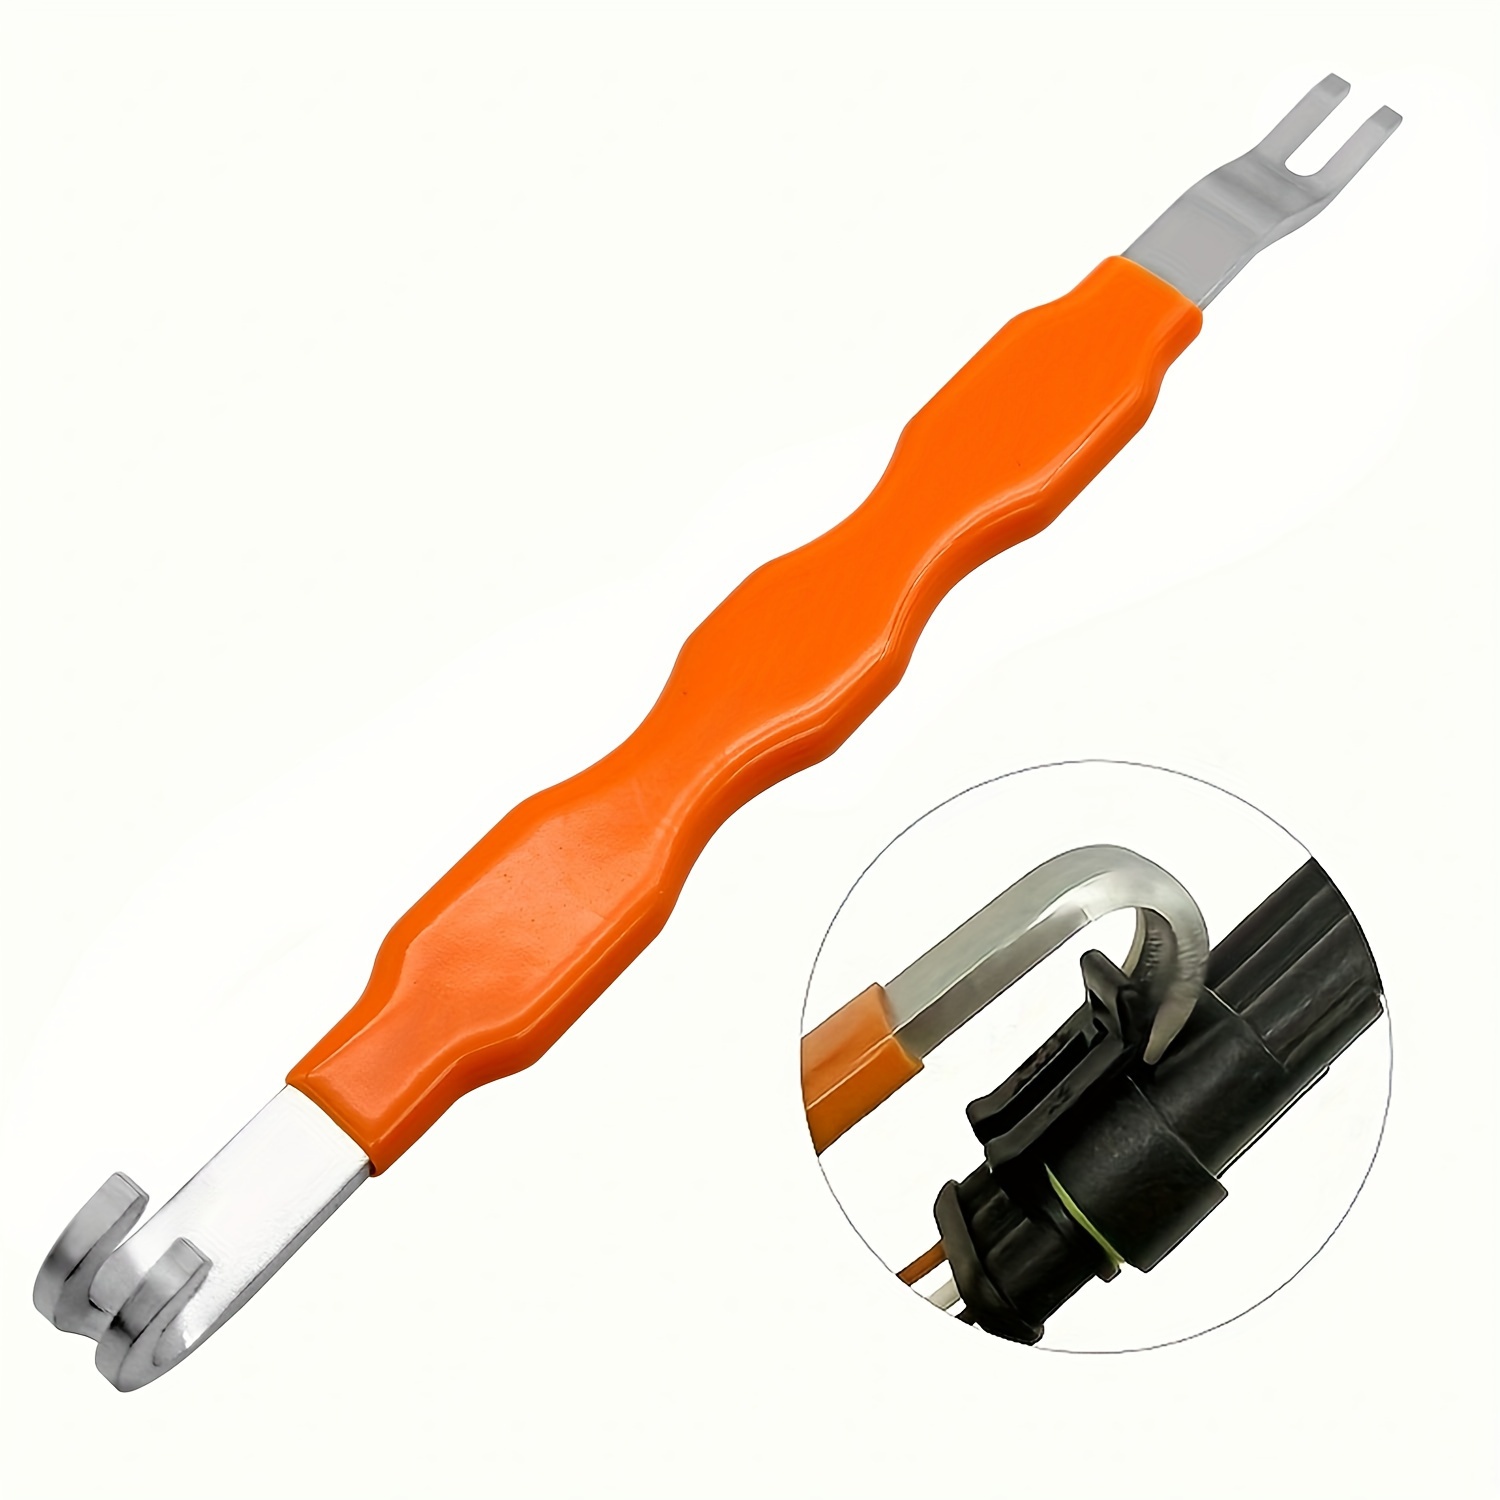 

Car Electrical Terminal Connector Removal Tool, Car Electrical Terminal Connector Splitter Removal Tool Gadget Orange